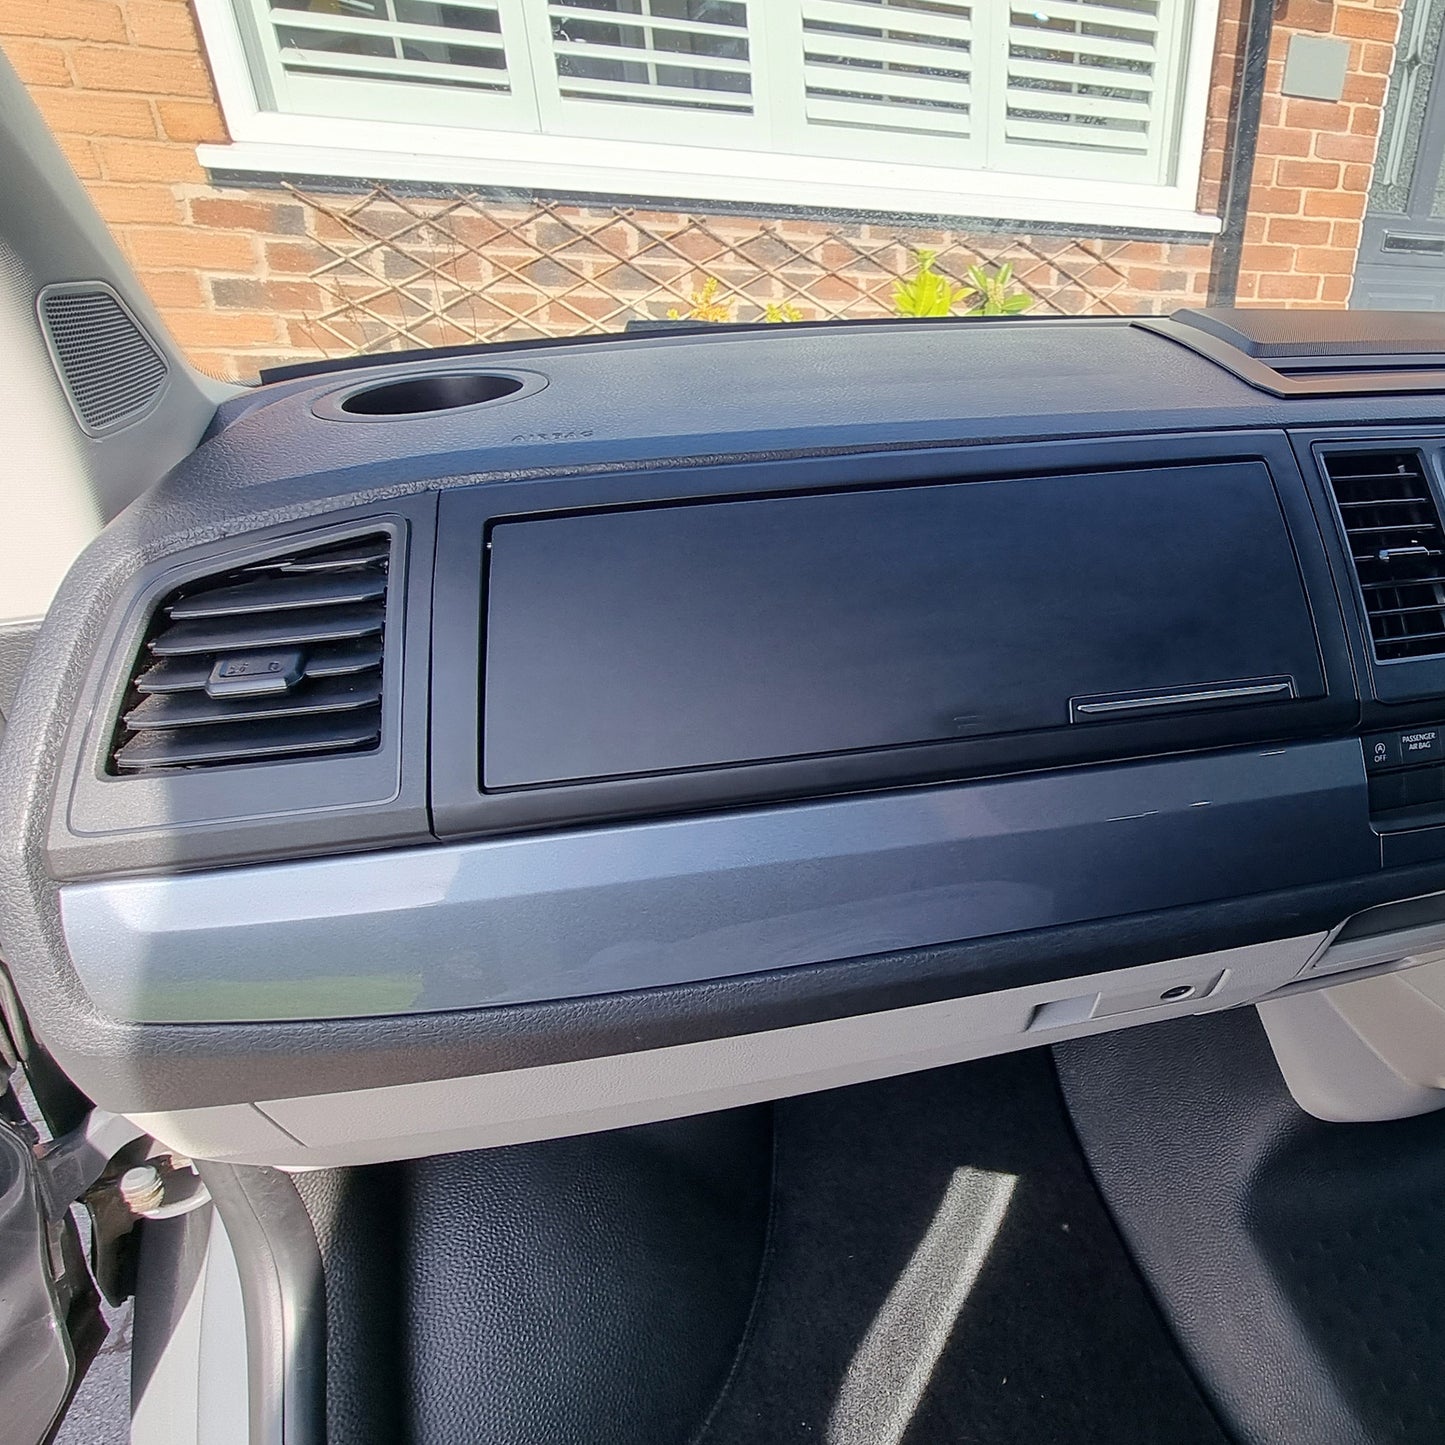 VW Transporter T6 Lower Dash Styling Trims Gun Metal Grey Painted and Ready to Fit